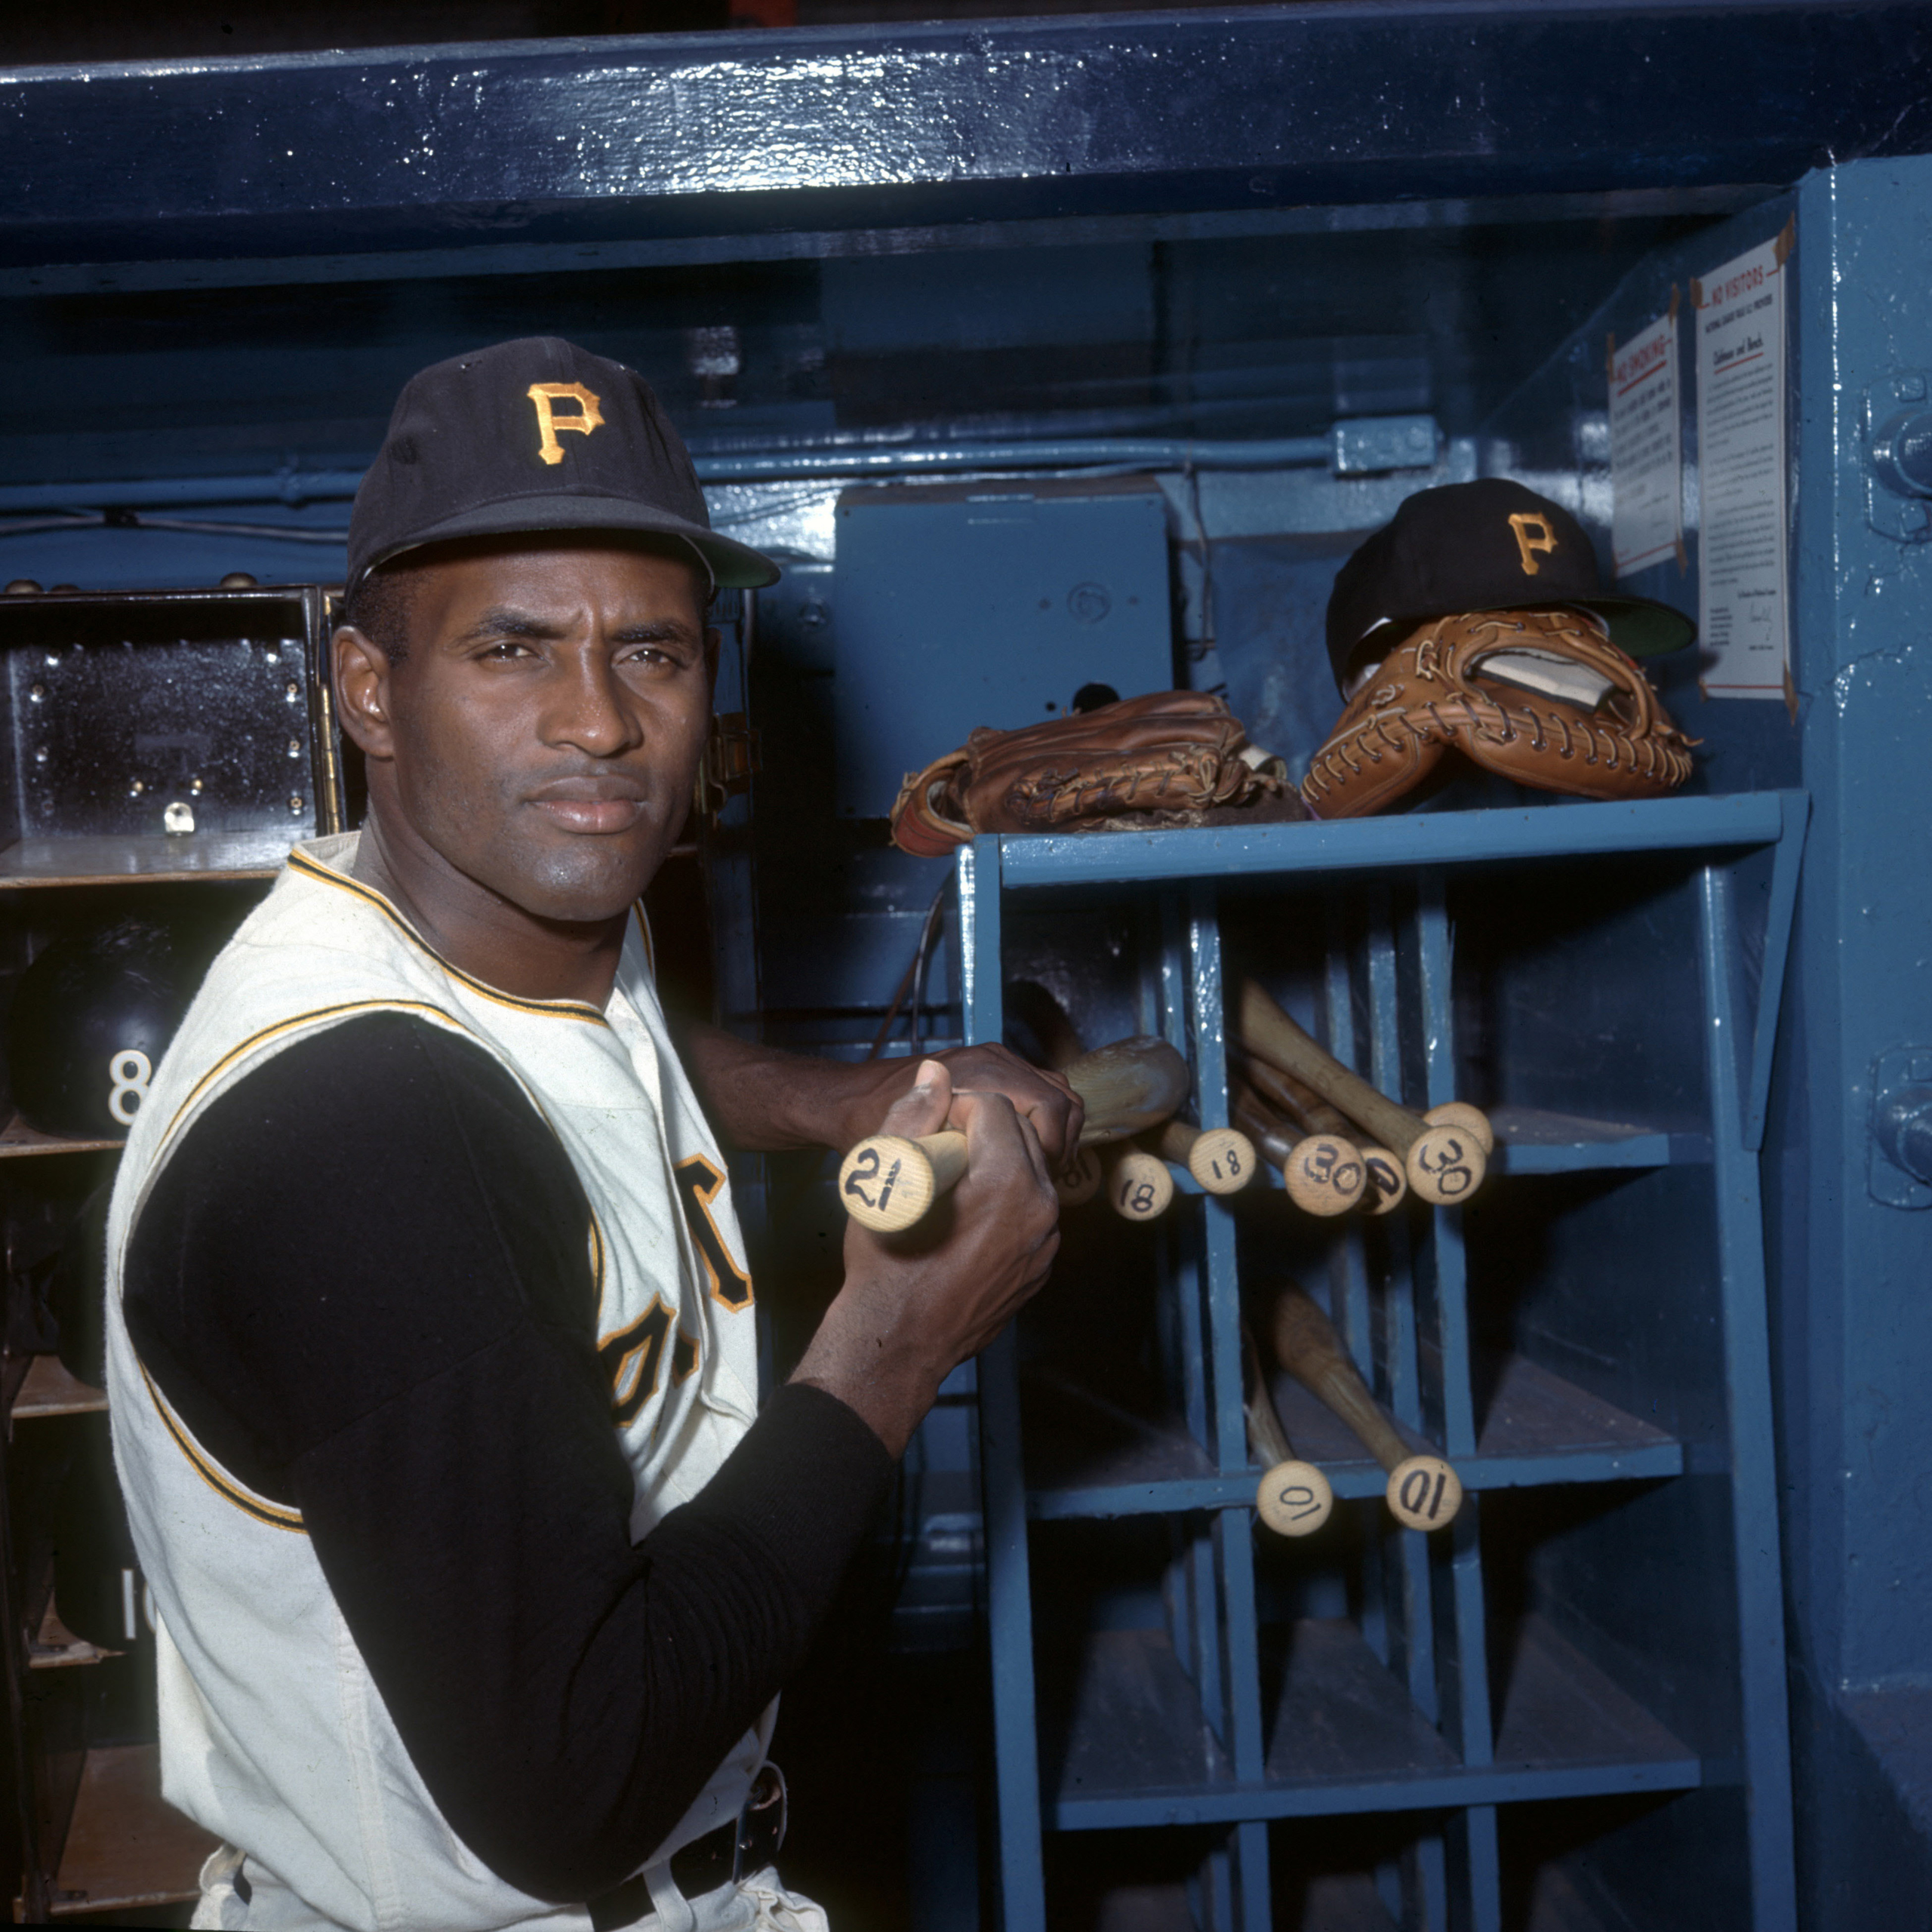 EXCLUSIVE: Mystery of Roberto Clemente’s 3000th-hit bat solved 50 years later